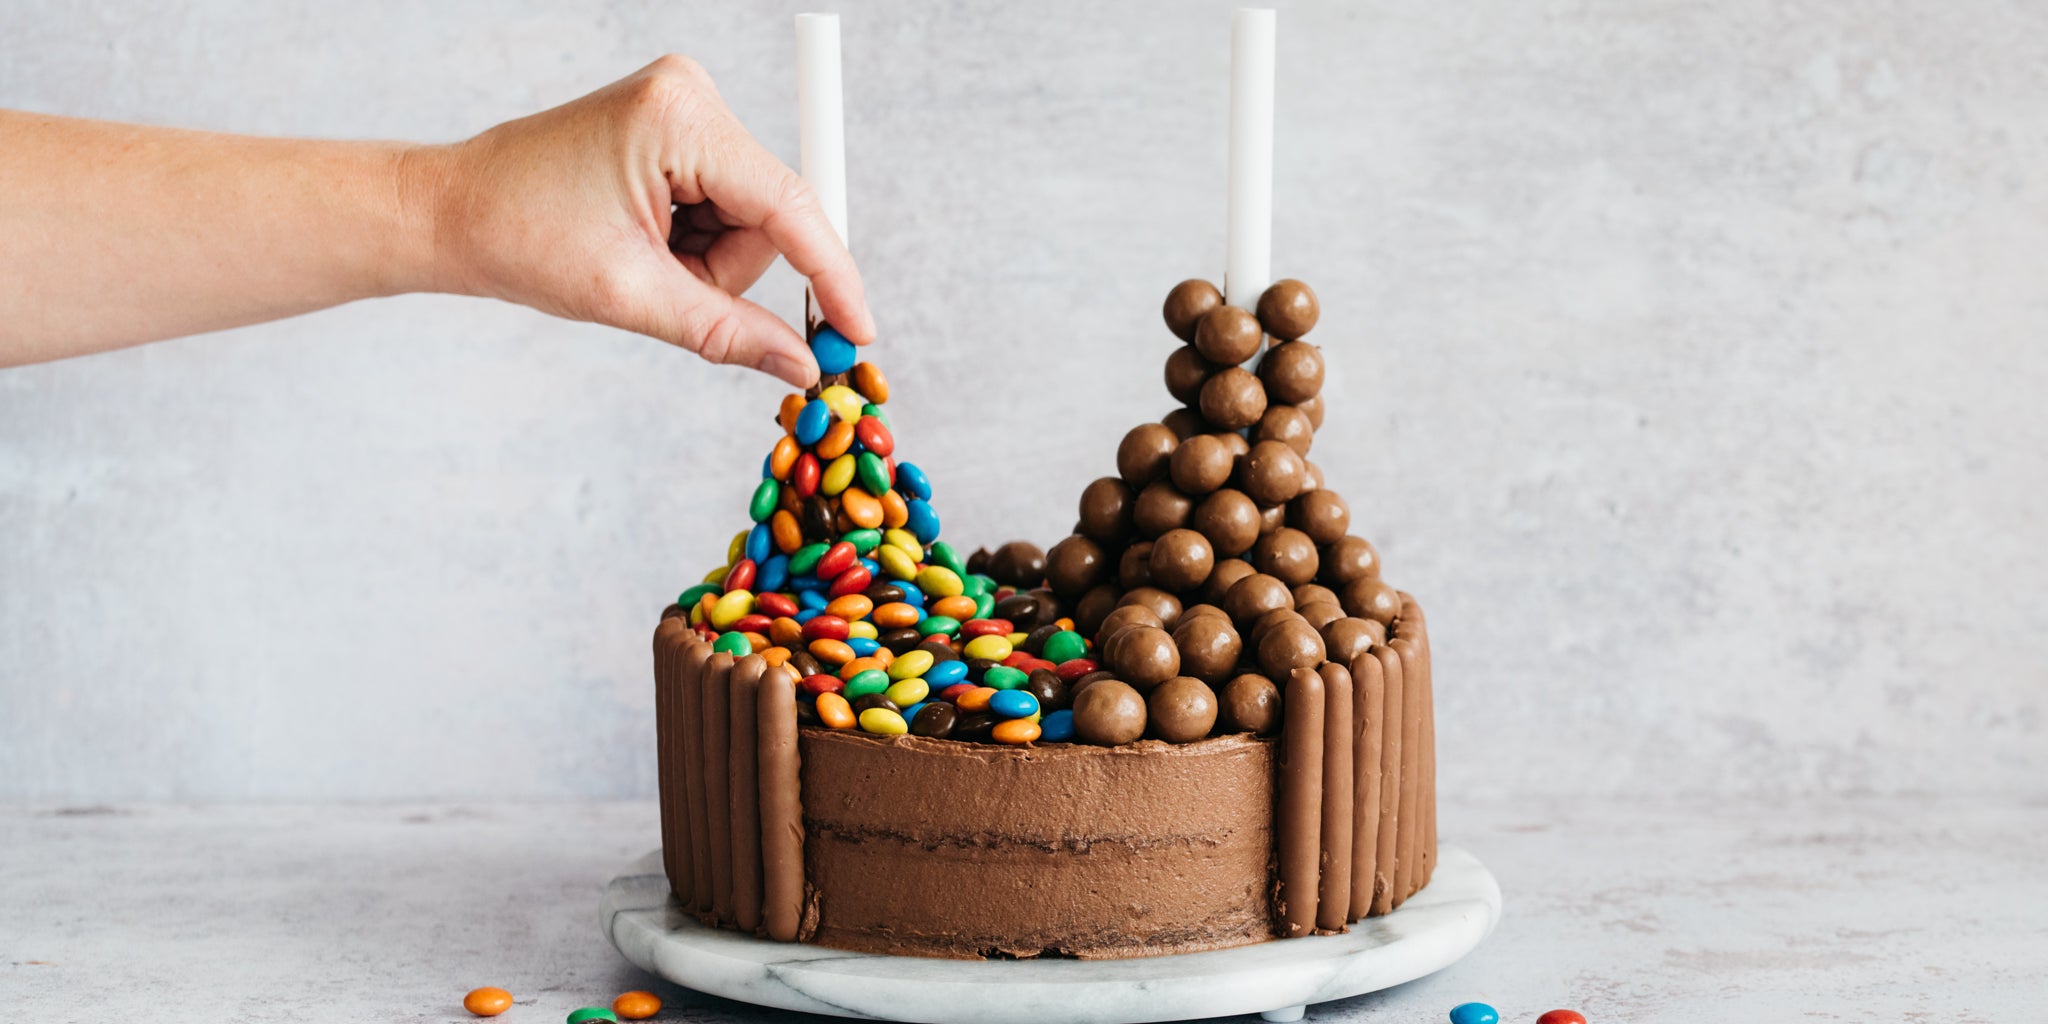 How to make a gravity-defying cake | Tesco Real Food